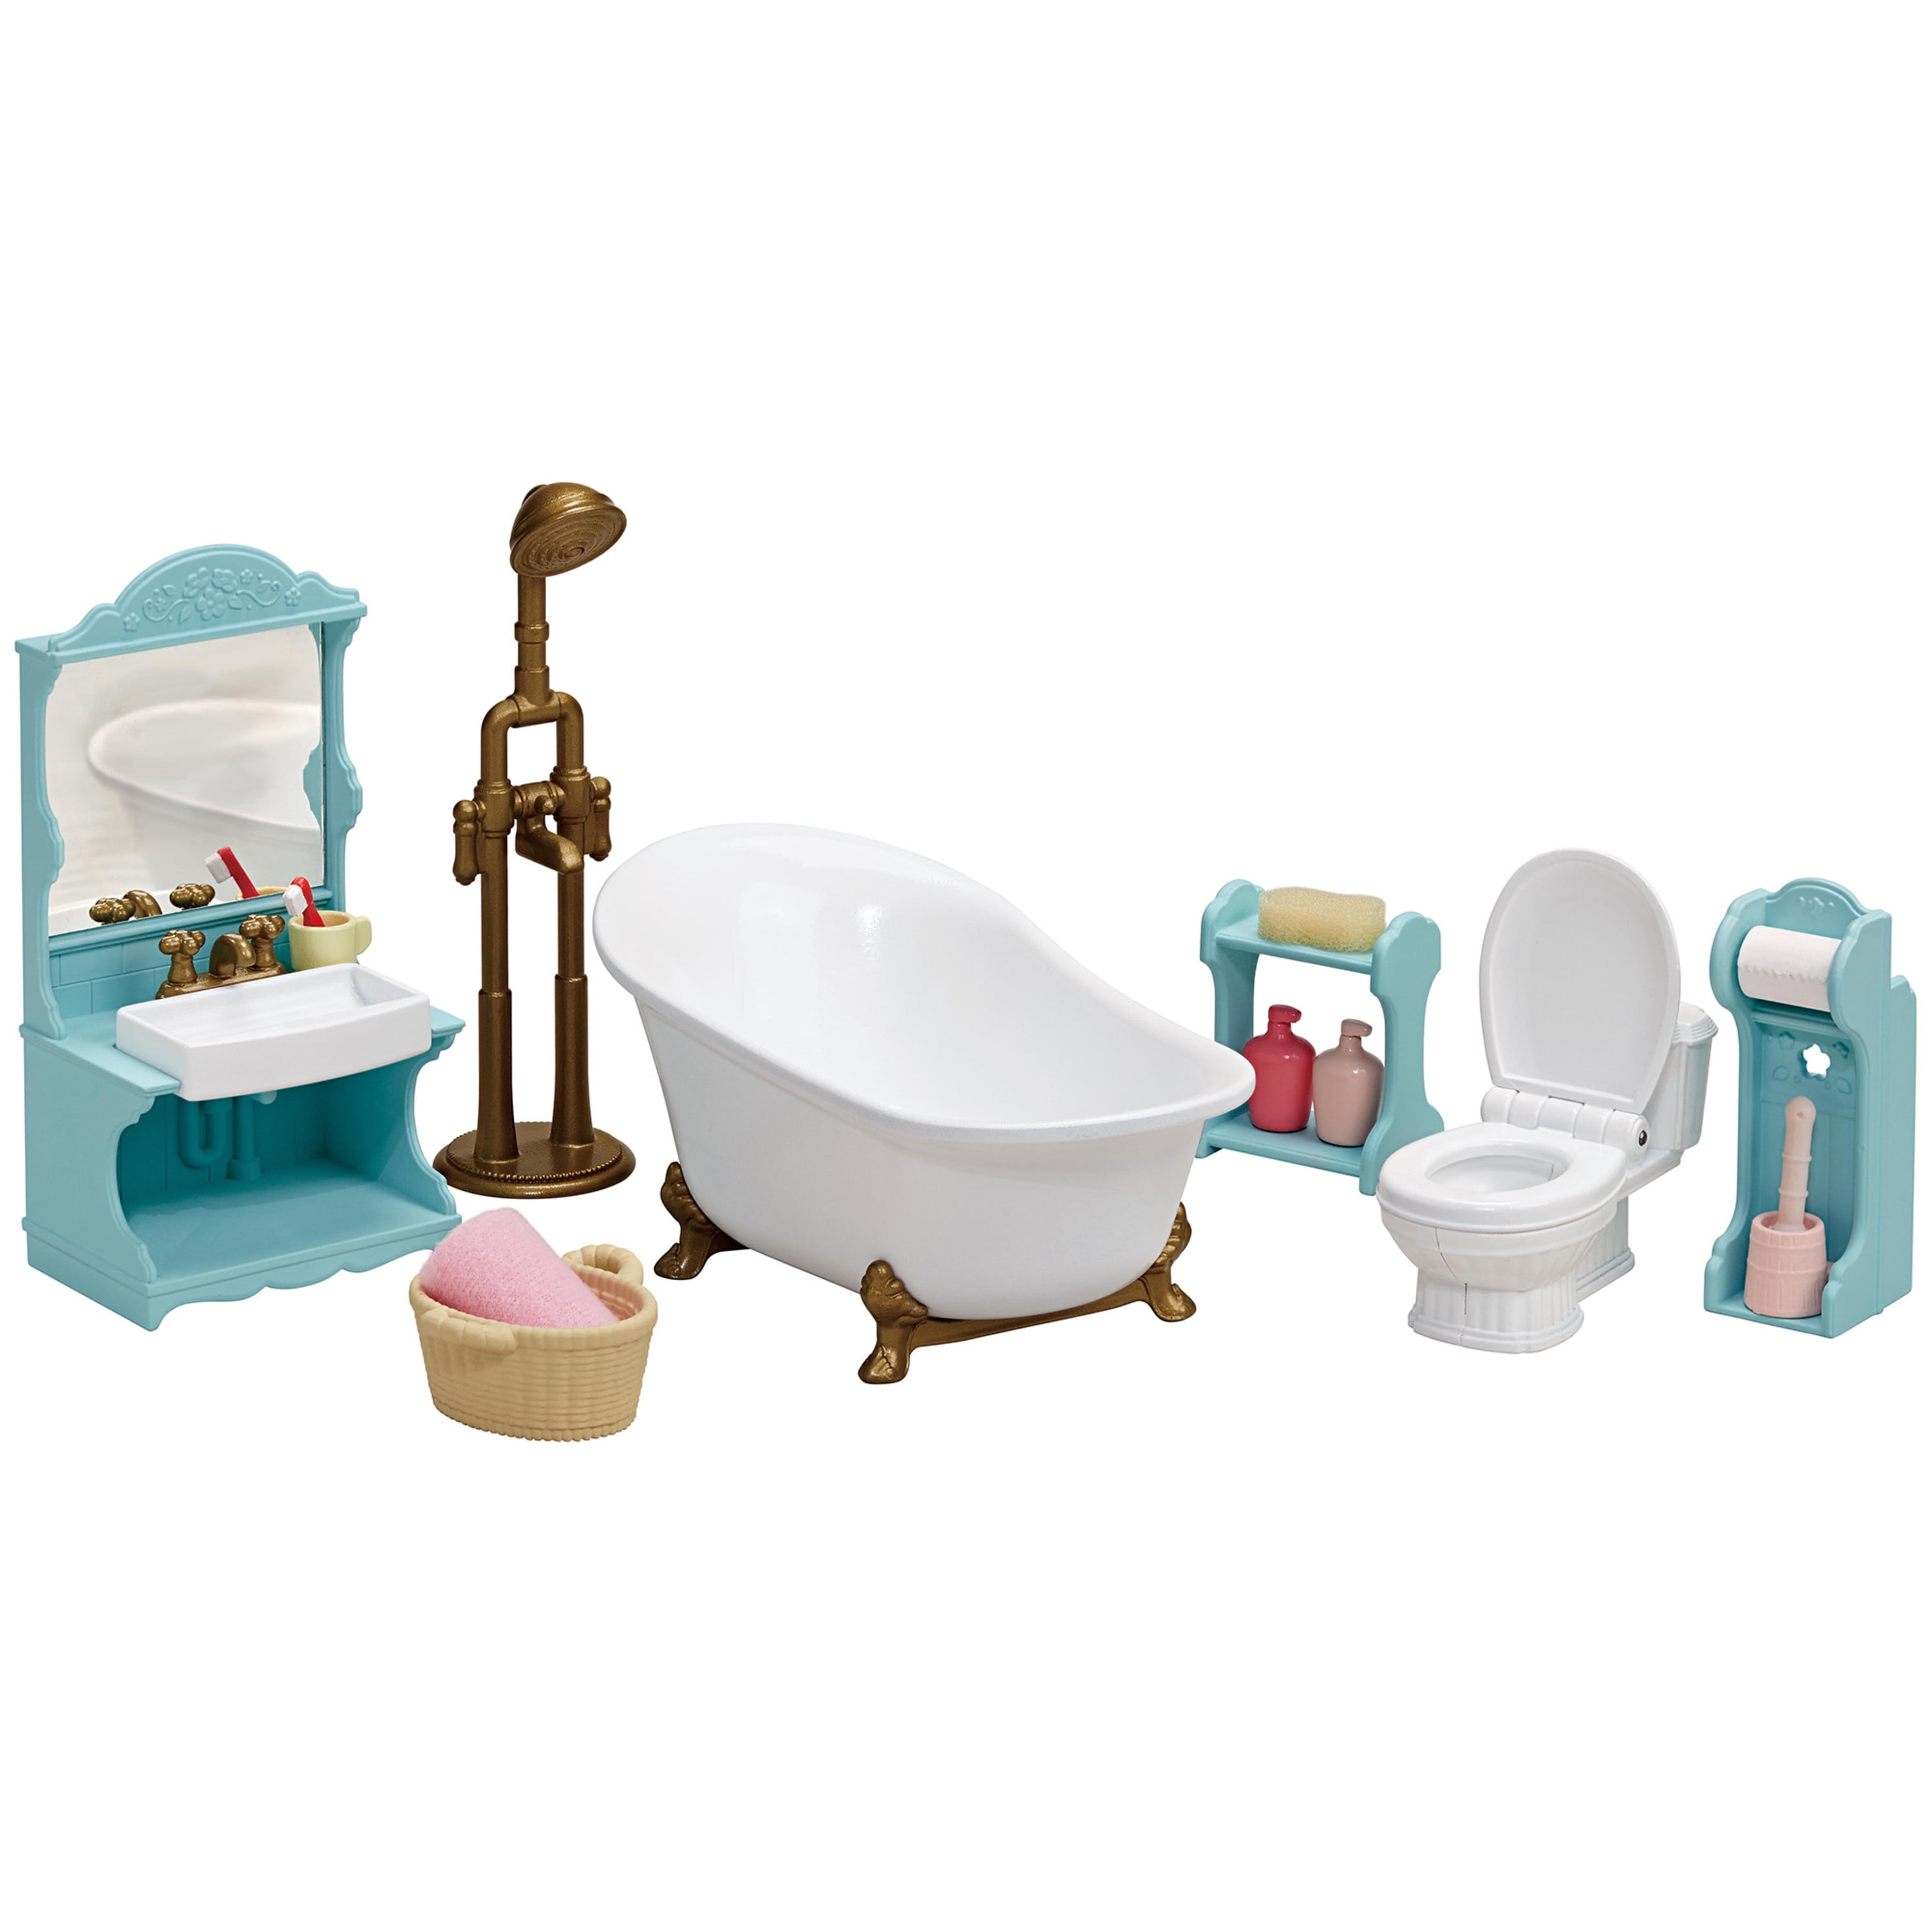 Calico Critters Deluxe Bathroom Set 30 Pcs Accesories Shower Tub Cabinet Mirror 